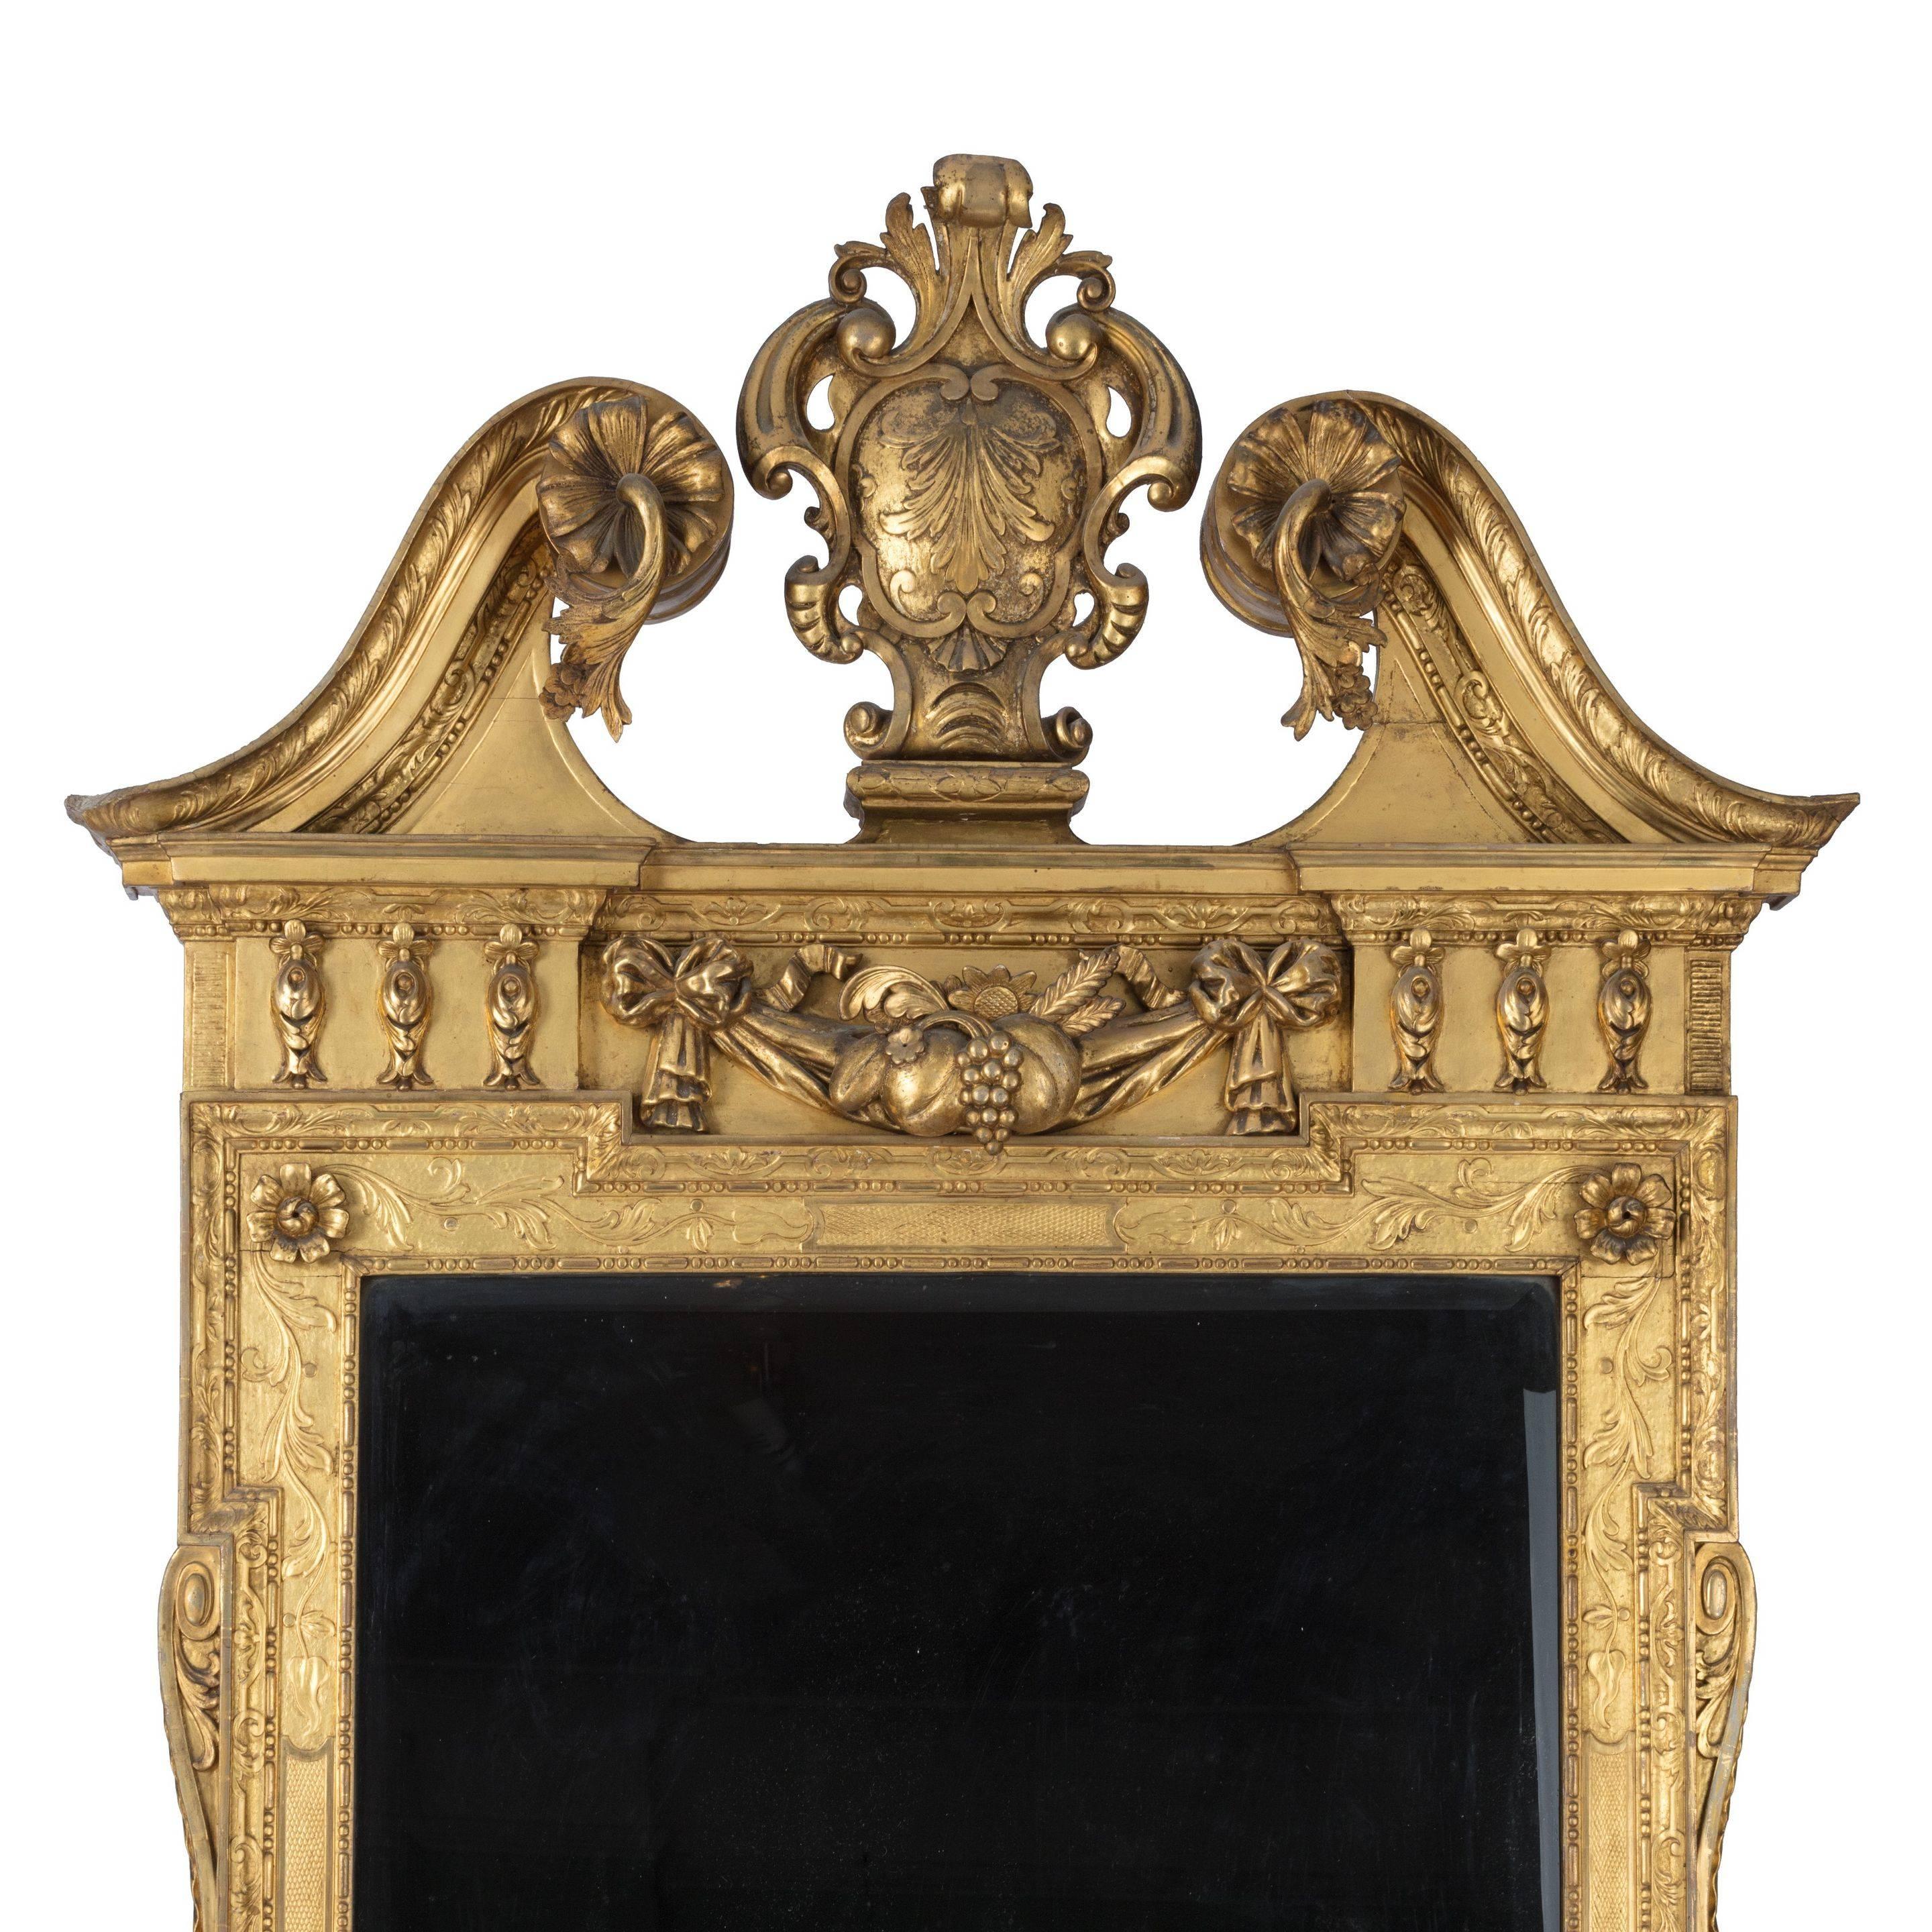 English Victorian Giltwood Mirror after a Design by William Kent